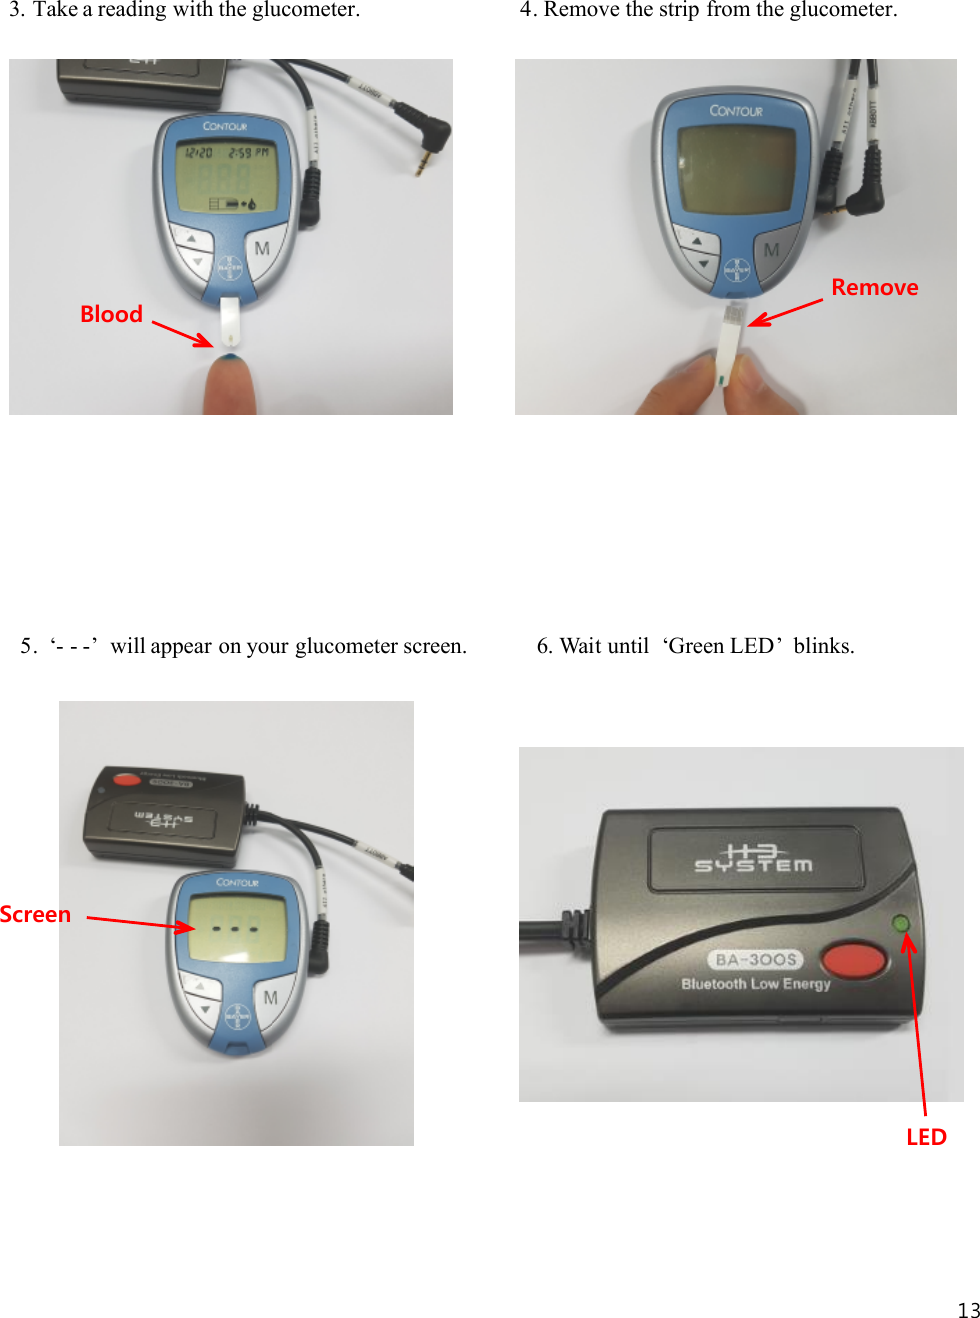 133. Take a reading with the glucometer. 4. Remove the strip from the glucometer.5. ‘- - -’ will appear on your glucometer screen. 6. Wait until ‘Green LED’ blinks.LEDScreenRemoveBlood